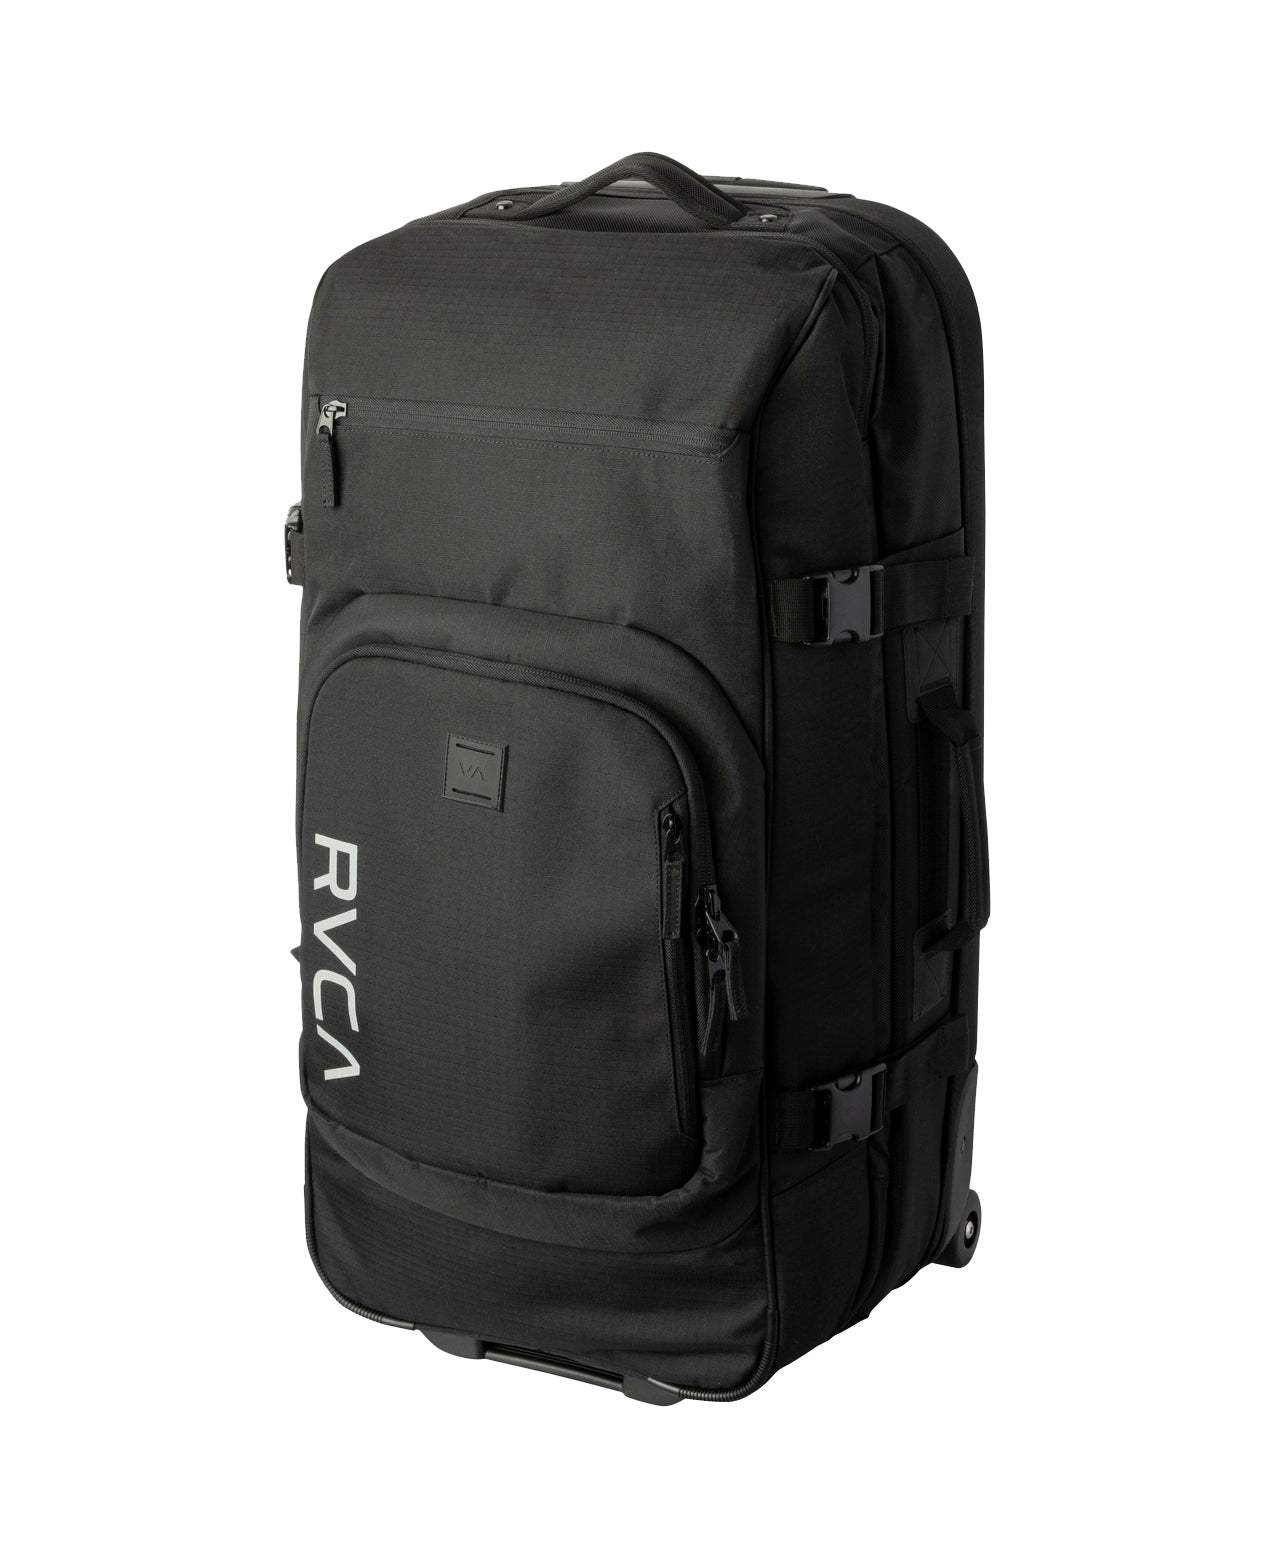 RVCA Large Roller Luggage RVB OS